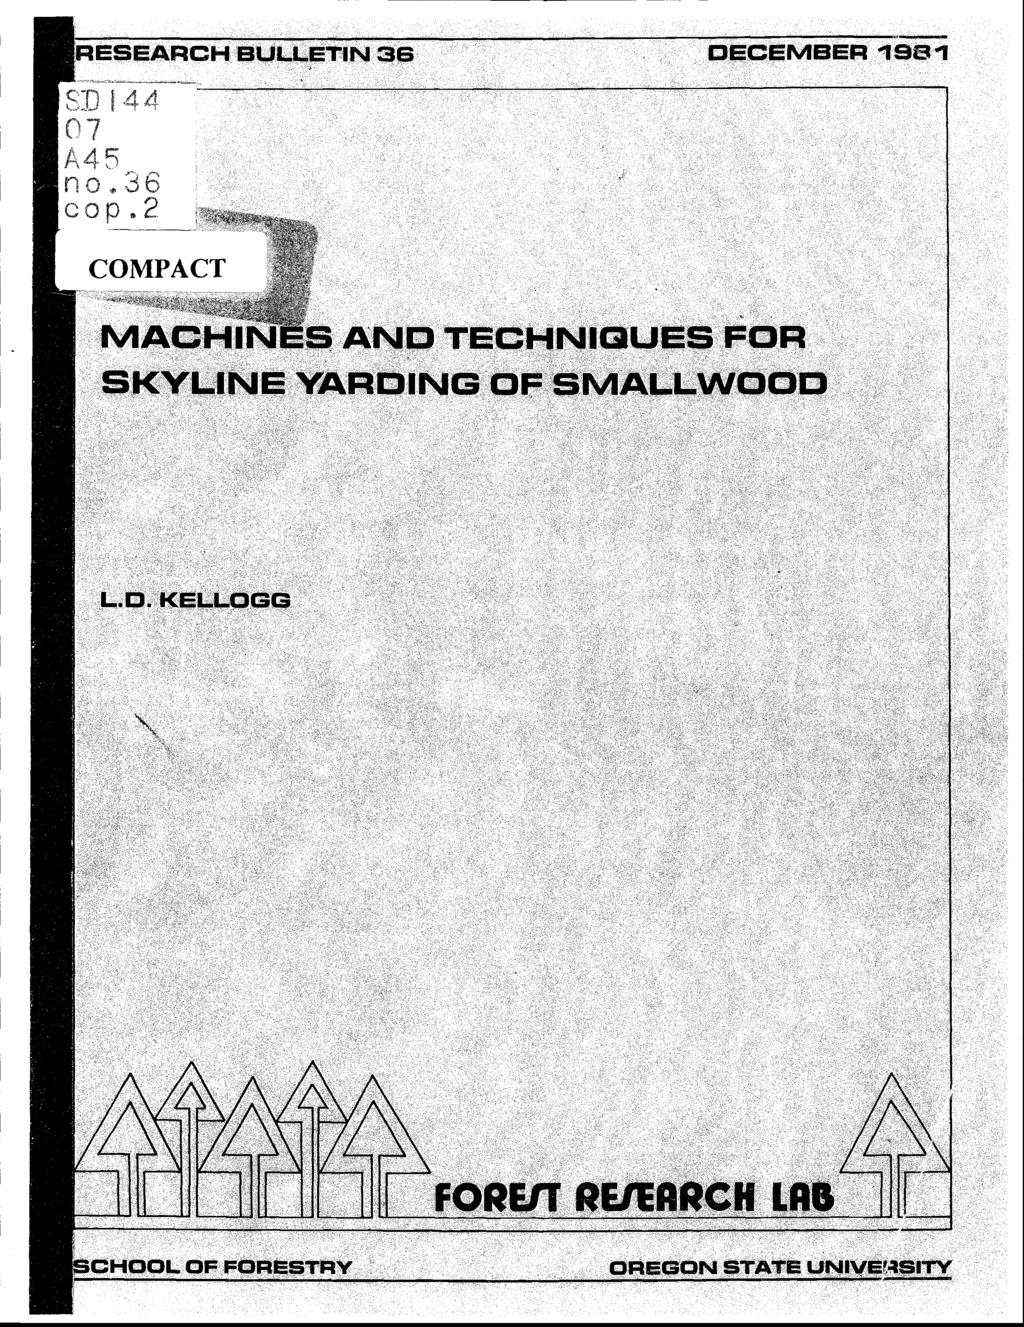 m RESEARCH BULLETIN 36 DECEMBER 1611 COMPACT MACHIN S AND TECHNIQUES FOR SKYLINE YARDING